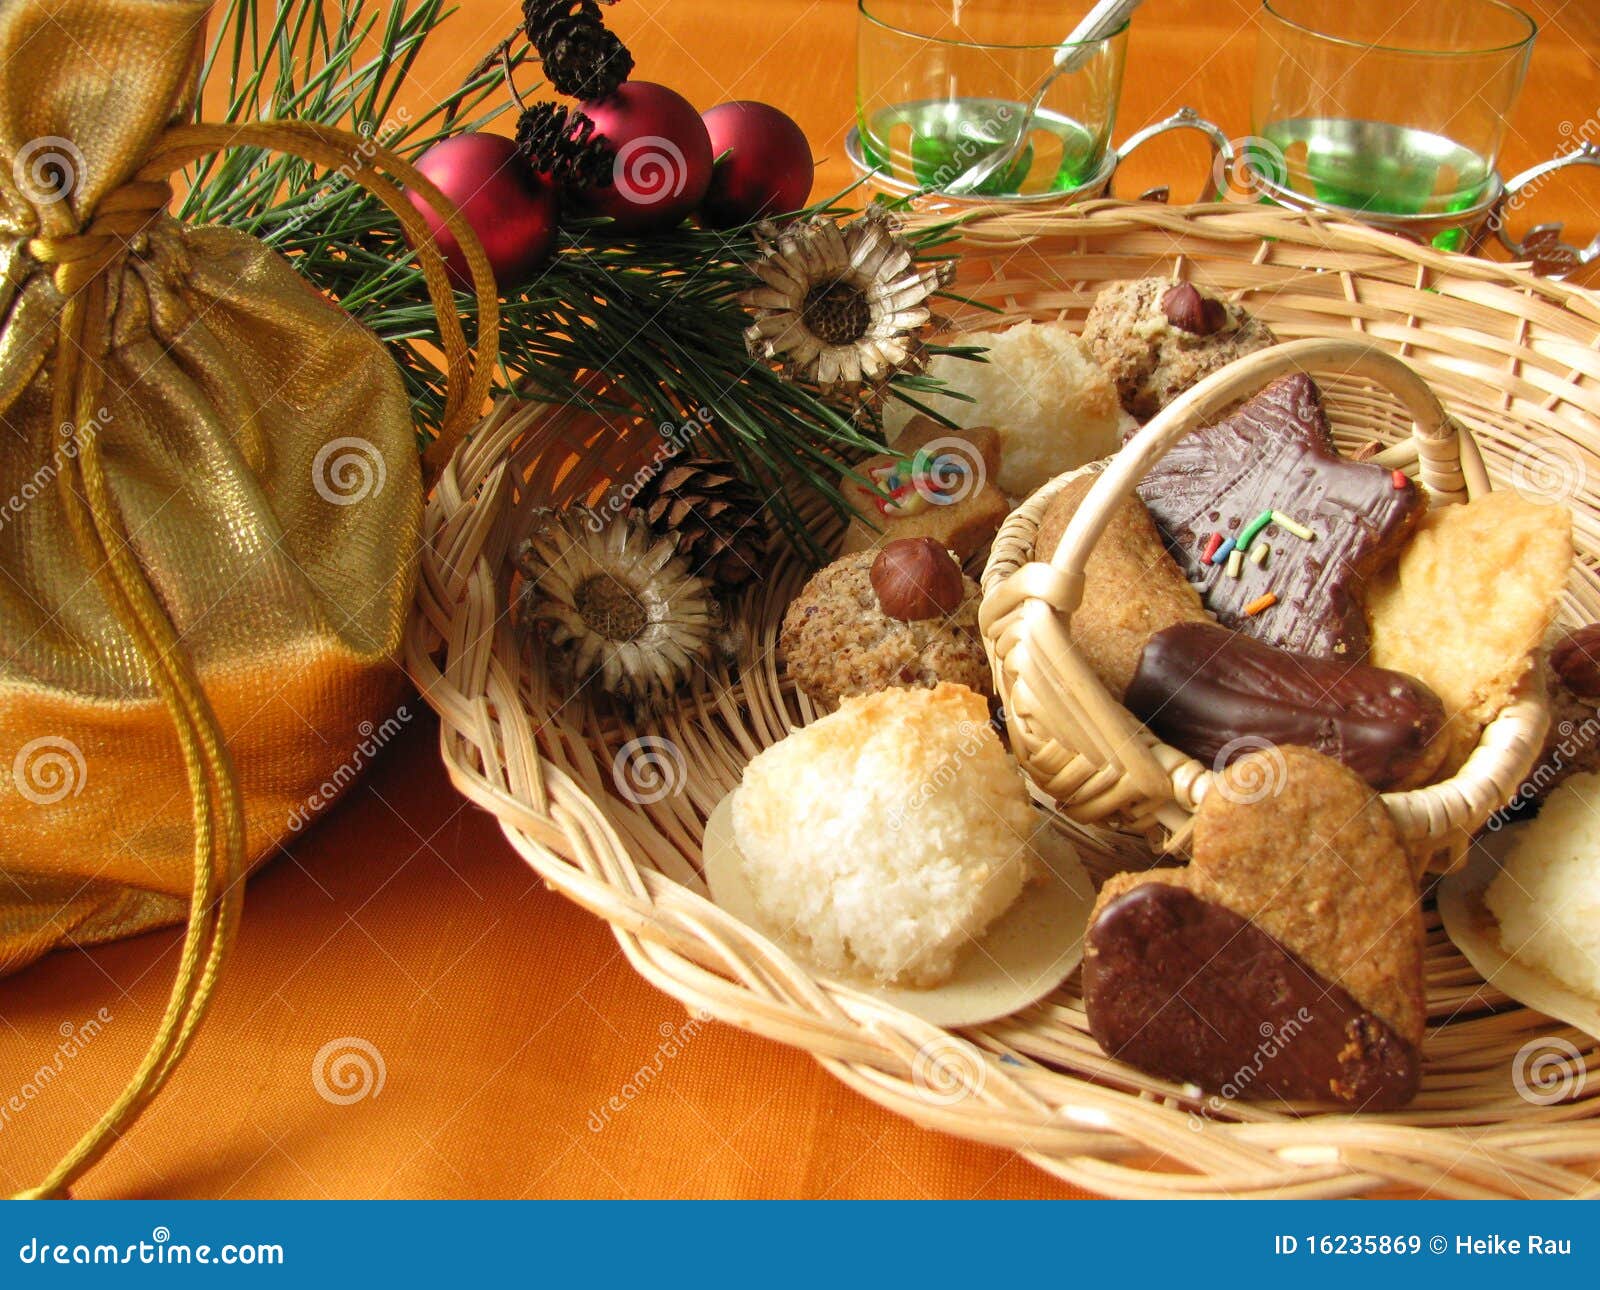 Homemade traditional christmas cookies in basket